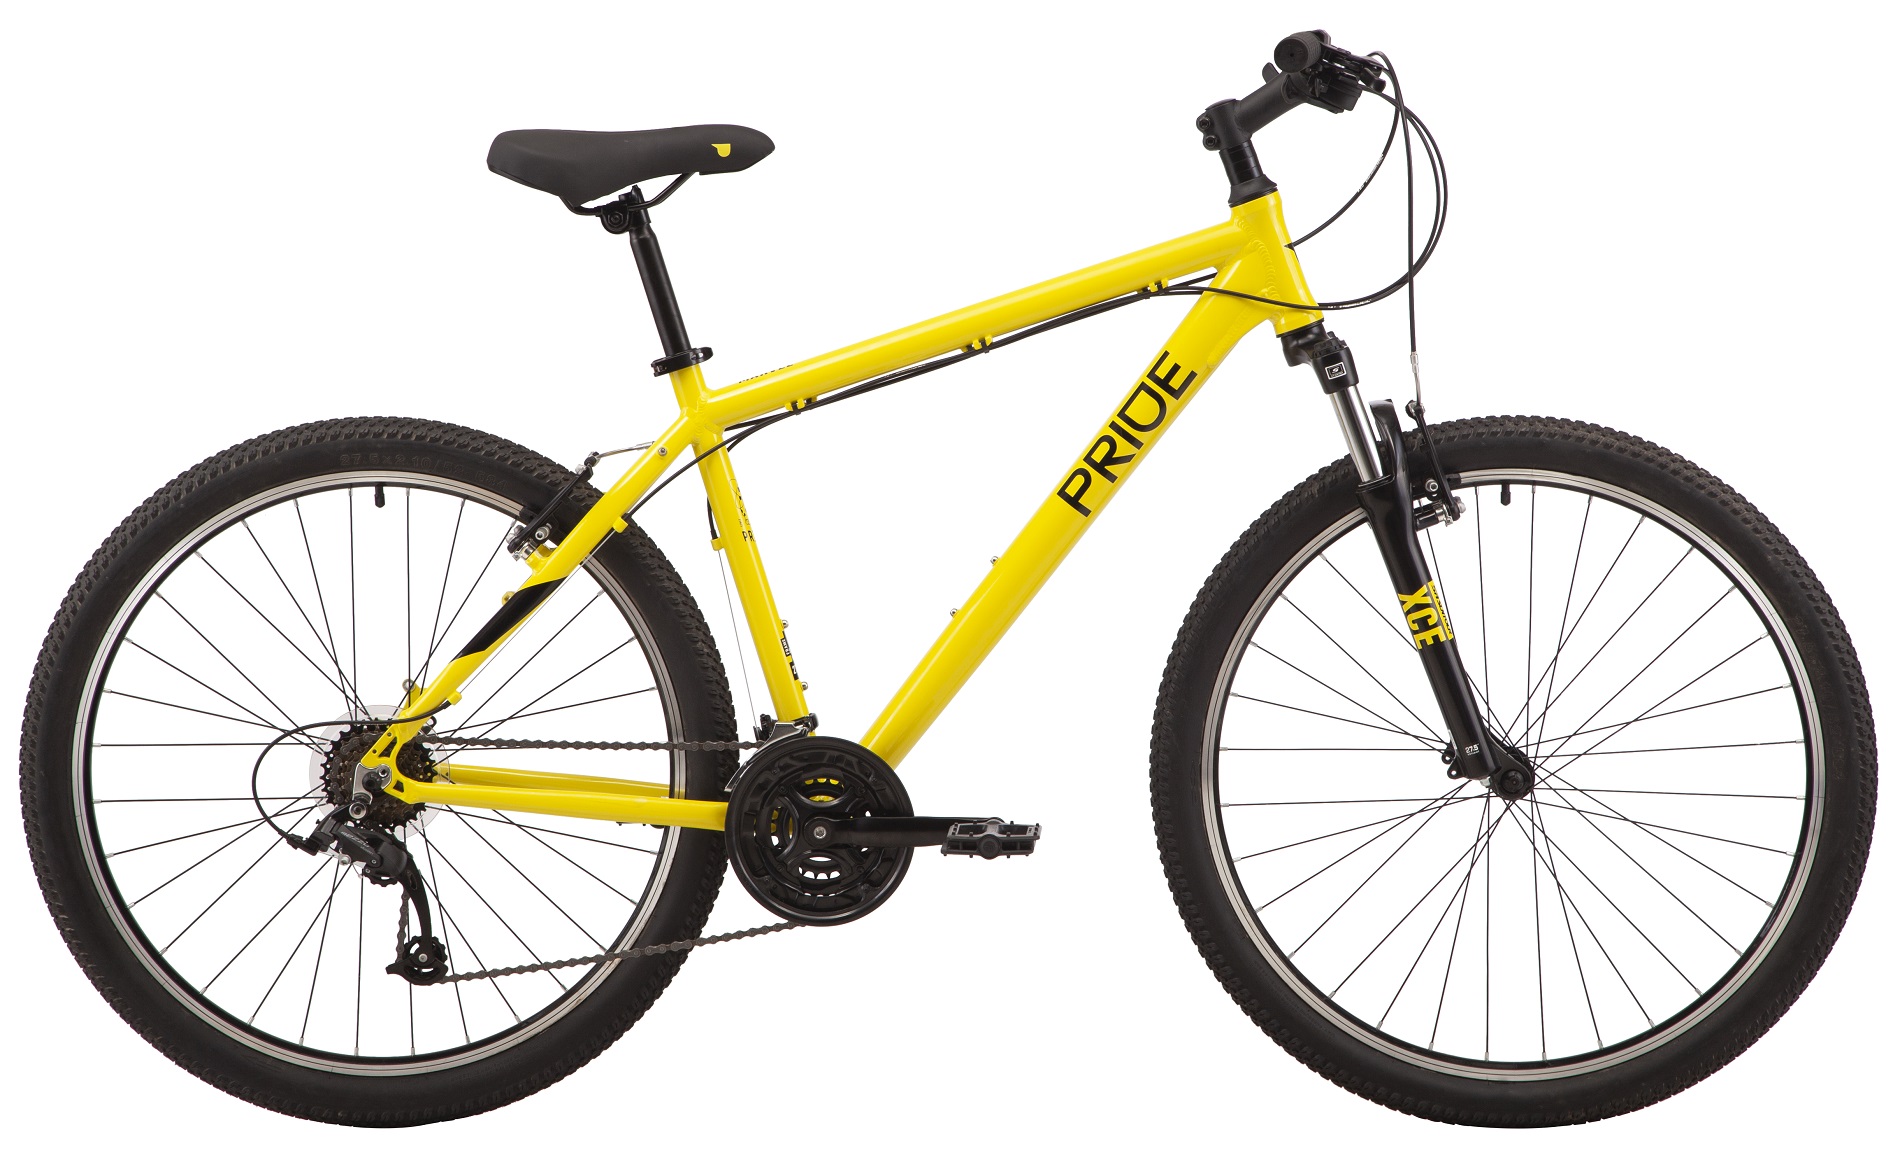 27.5" PRIDE MARVEL 7.1 frame - M 2022 Yellow (rear and front switches and tamnet - Microshift) Photo